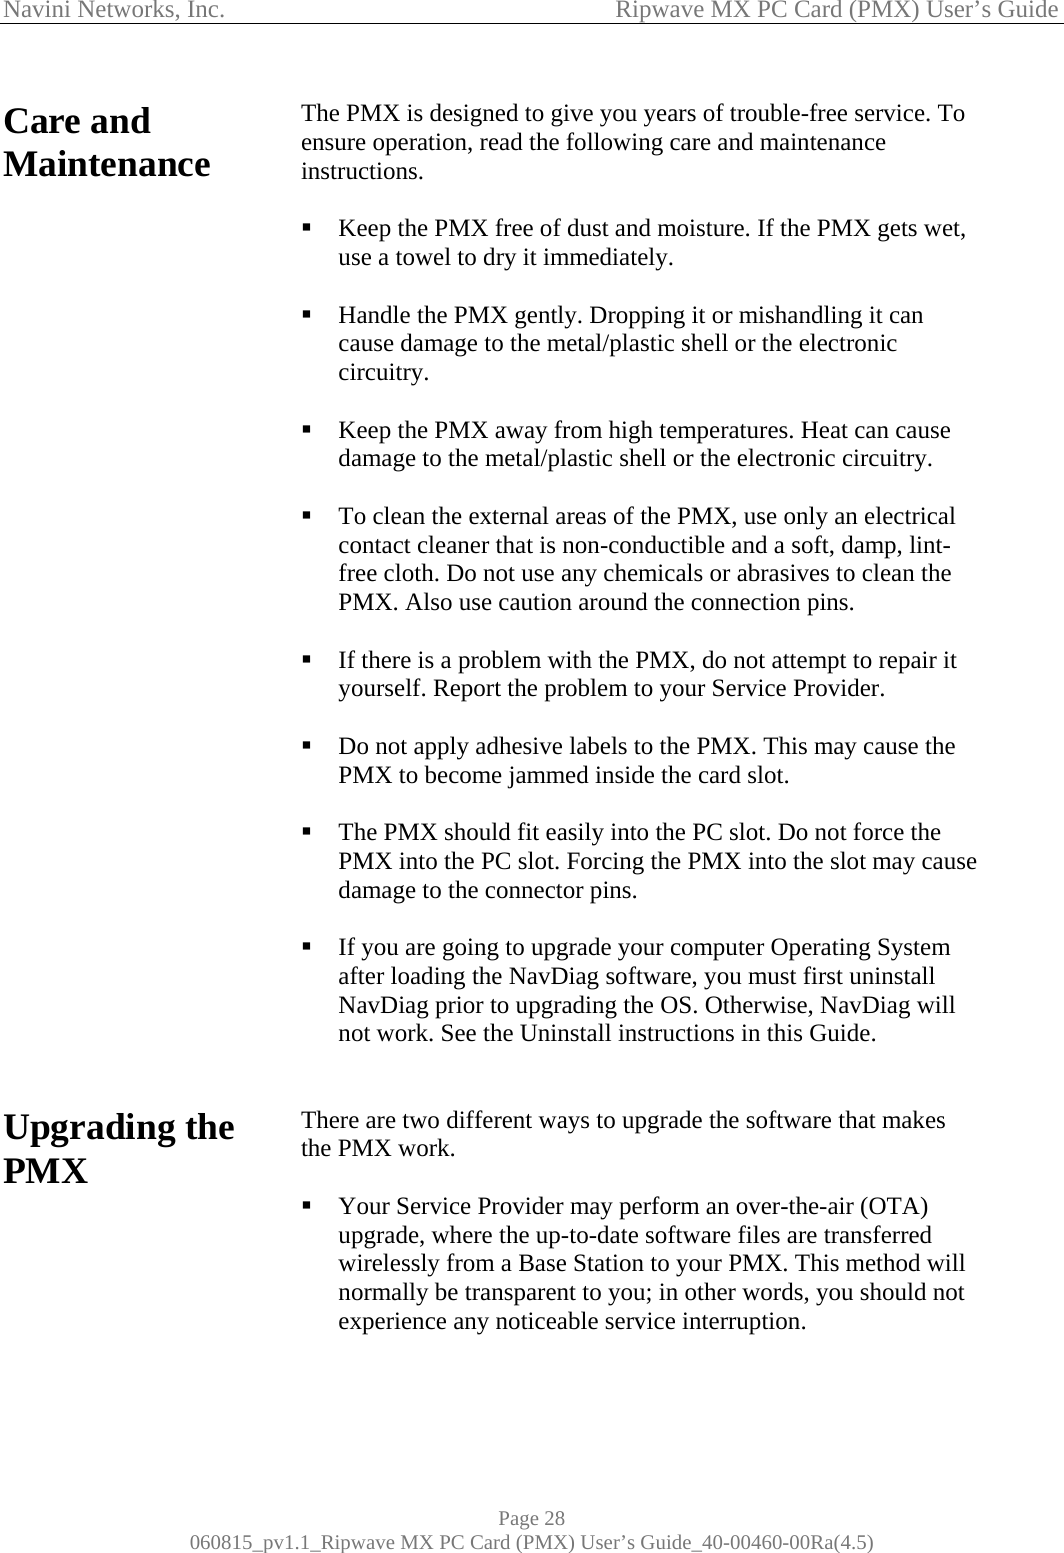 Navini Networks, Inc.                                           Ripwave MX PC Card (PMX) User’s Guide Care and Maintenance                                 Upgrading the PMX         The PMX is designed to give you years of trouble-free service. To ensure operation, read the following care and maintenance instructions.   Keep the PMX free of dust and moisture. If the PMX gets wet, use a towel to dry it immediately.   Handle the PMX gently. Dropping it or mishandling it can cause damage to the metal/plastic shell or the electronic circuitry.   Keep the PMX away from high temperatures. Heat can cause damage to the metal/plastic shell or the electronic circuitry.   To clean the external areas of the PMX, use only an electrical contact cleaner that is non-conductible and a soft, damp, lint-free cloth. Do not use any chemicals or abrasives to clean the PMX. Also use caution around the connection pins.   If there is a problem with the PMX, do not attempt to repair it yourself. Report the problem to your Service Provider.   Do not apply adhesive labels to the PMX. This may cause the PMX to become jammed inside the card slot.   The PMX should fit easily into the PC slot. Do not force the PMX into the PC slot. Forcing the PMX into the slot may cause damage to the connector pins.   If you are going to upgrade your computer Operating System after loading the NavDiag software, you must first uninstall NavDiag prior to upgrading the OS. Otherwise, NavDiag will not work. See the Uninstall instructions in this Guide.   There are two different ways to upgrade the software that makes the PMX work.    Your Service Provider may perform an over-the-air (OTA) upgrade, where the up-to-date software files are transferred wirelessly from a Base Station to your PMX. This method will normally be transparent to you; in other words, you should not experience any noticeable service interruption.    Page 28 060815_pv1.1_Ripwave MX PC Card (PMX) User’s Guide_40-00460-00Ra(4.5) 